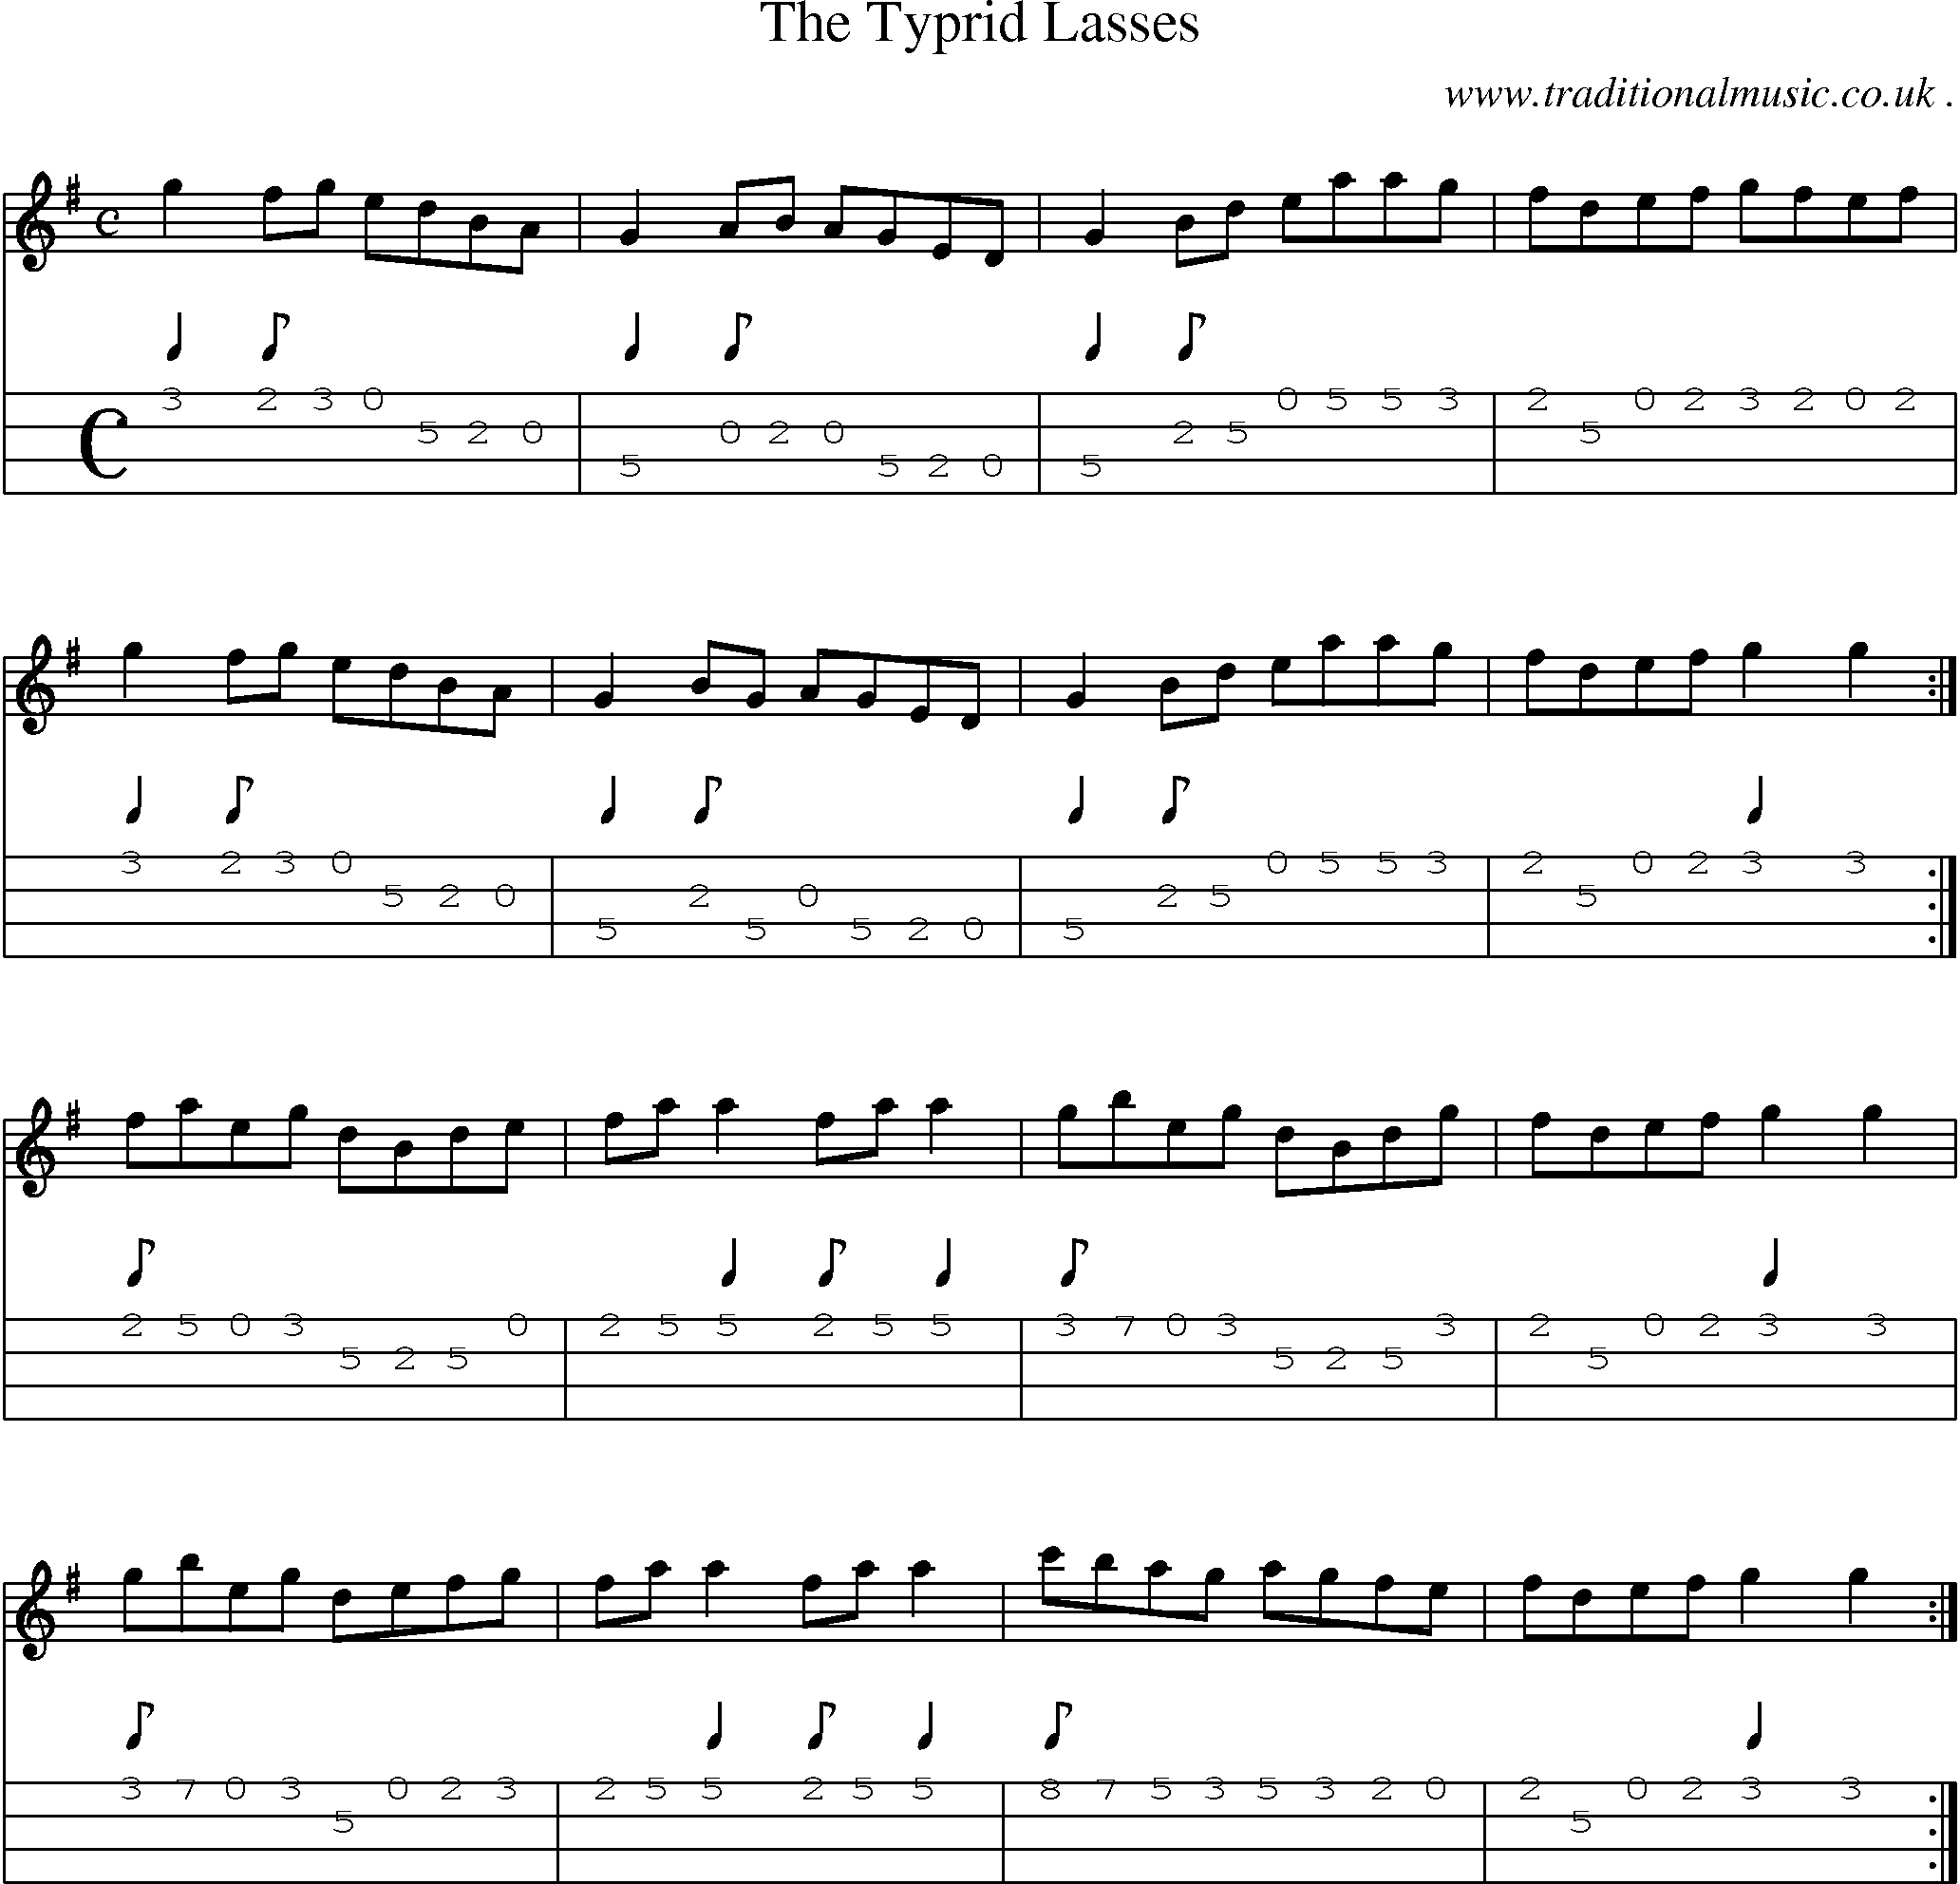 Sheet-Music and Mandolin Tabs for The Typrid Lasses